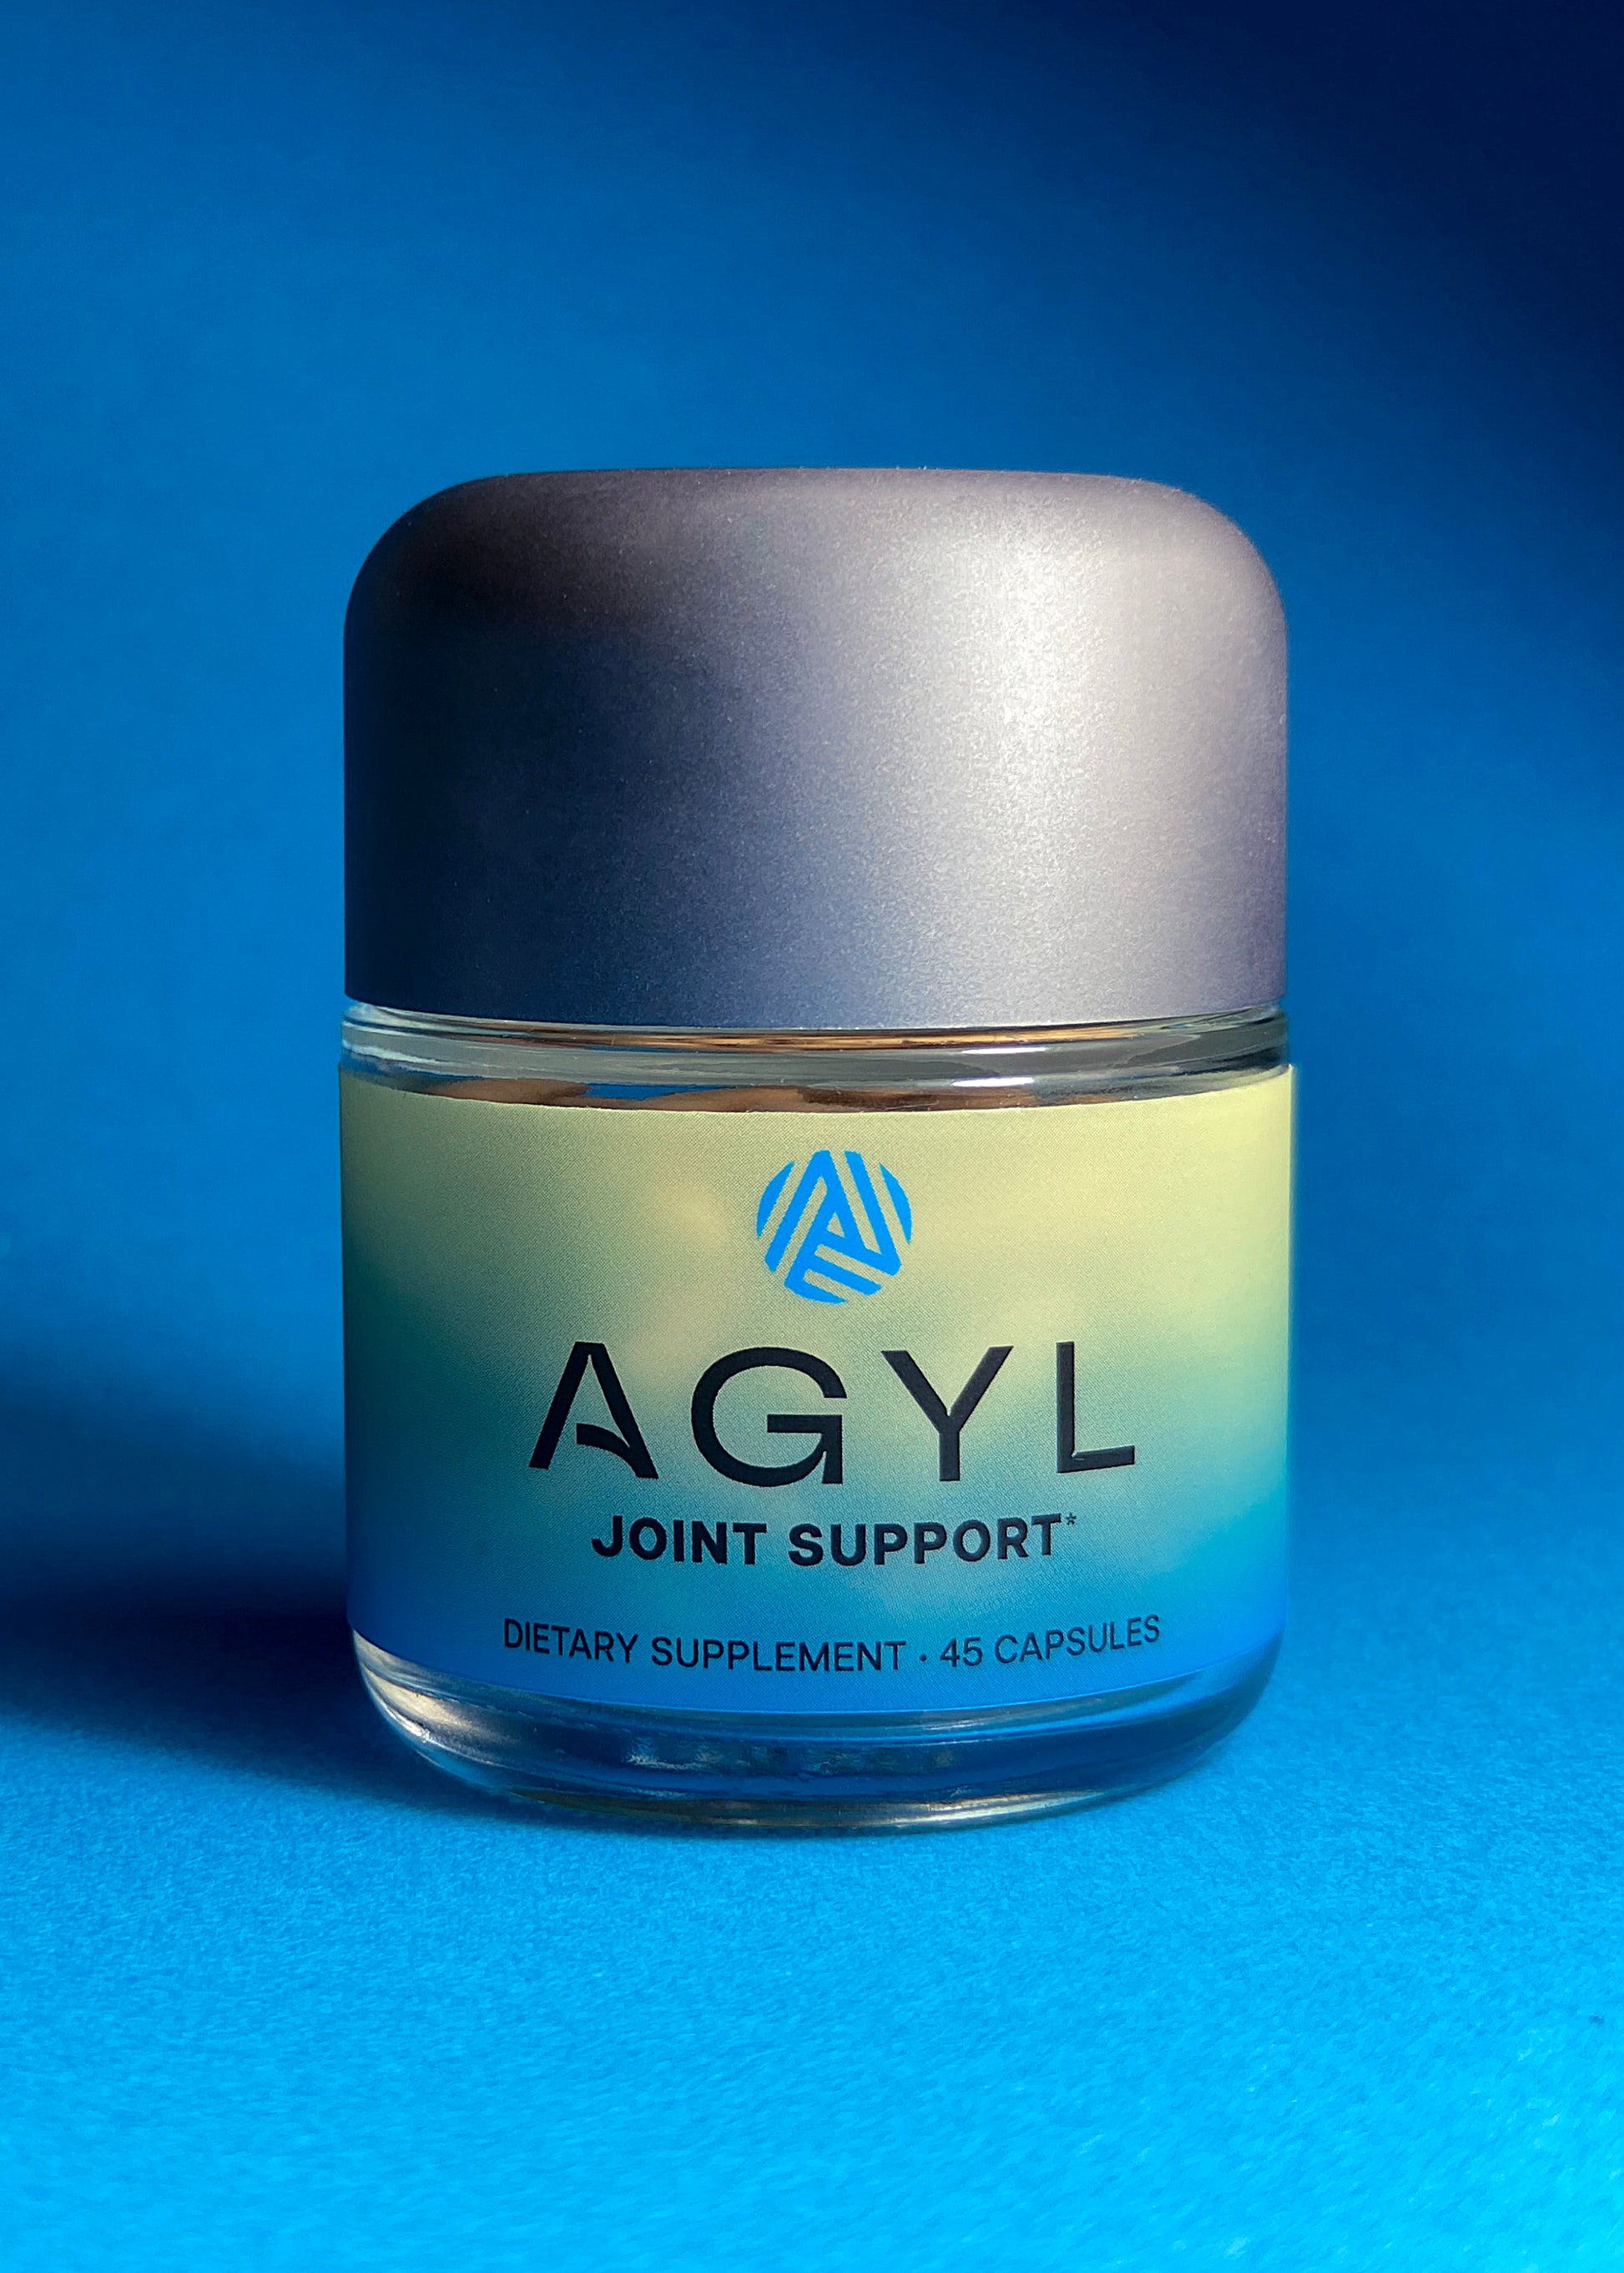 AGYL Joint support 45 capsule bottle in blue background.